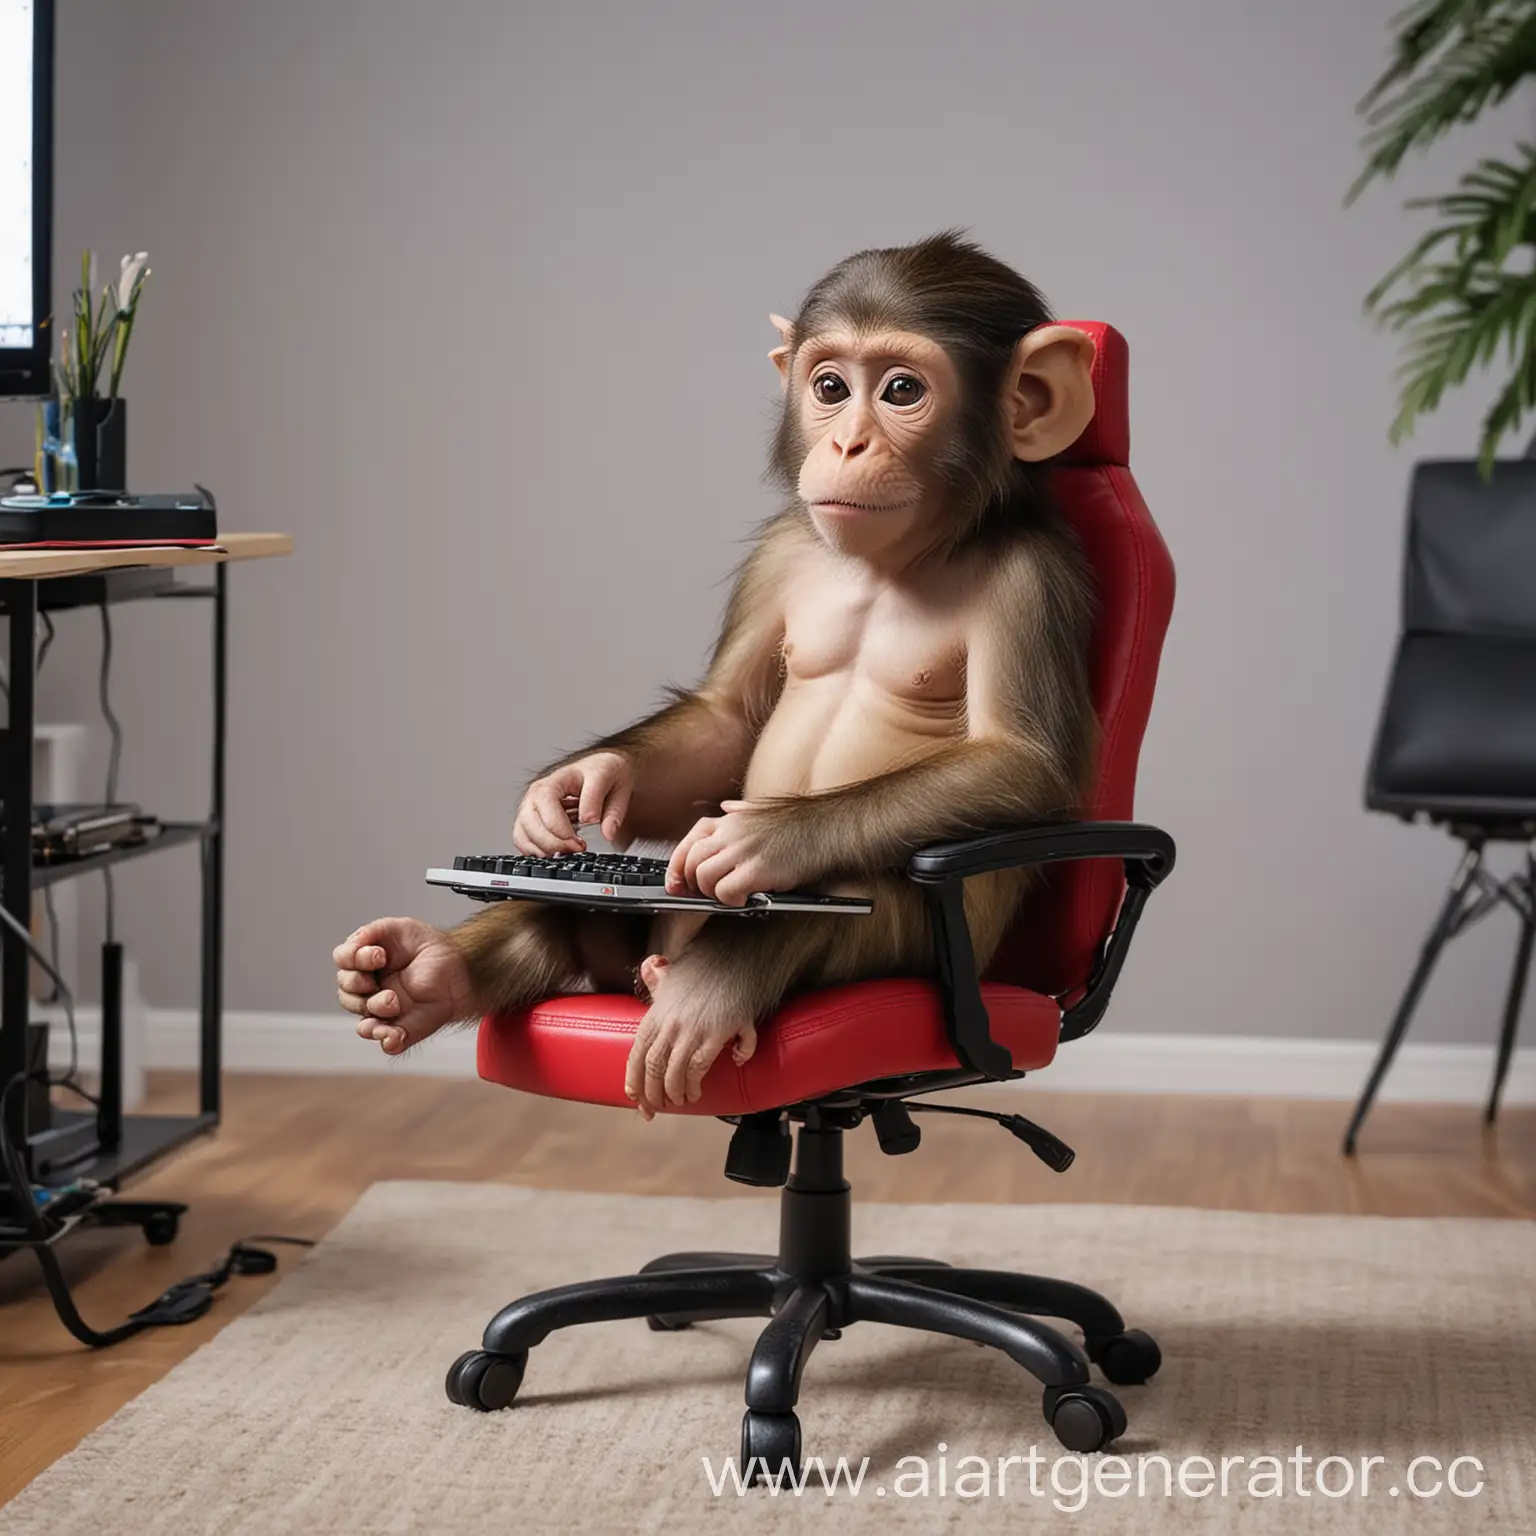 Playful-Monkey-Gaming-on-Laptop-in-Room